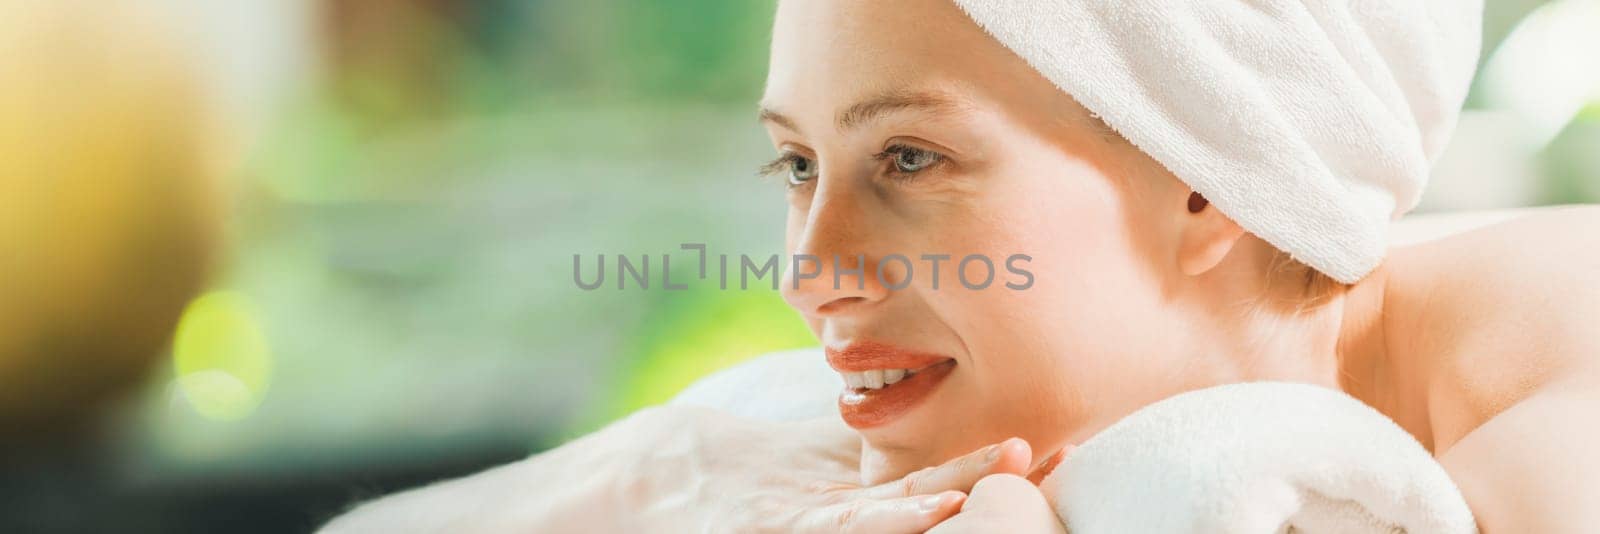 Closeup of beautiful women in white towel relaxes on spa bed surrounded by peaceful and calm nature. Young gorgeous female wearing white towel during waiting for body massage. Side view. Tranquility